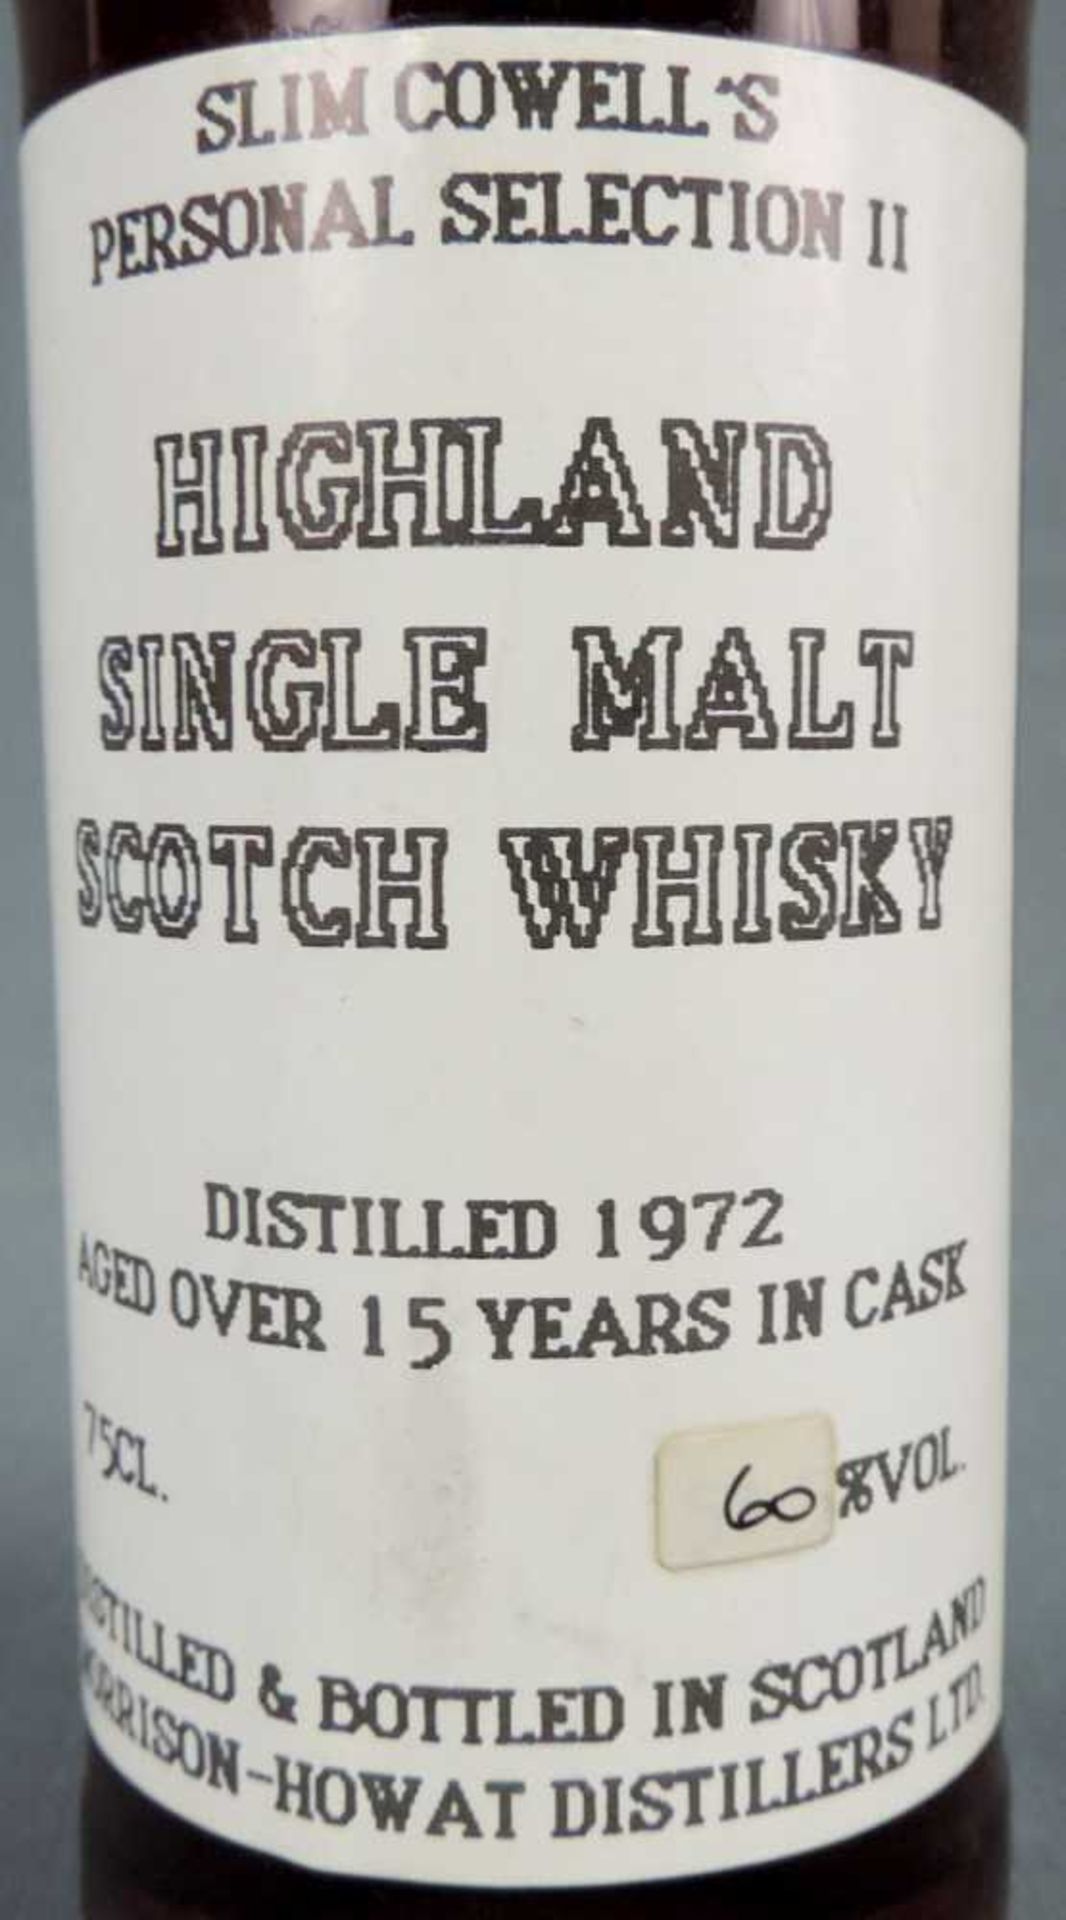 Slim Cowell’s Personal Selection II. Morrison - Howat. Highland Single Malt Scotch Whisky. 75cl. - Image 2 of 4